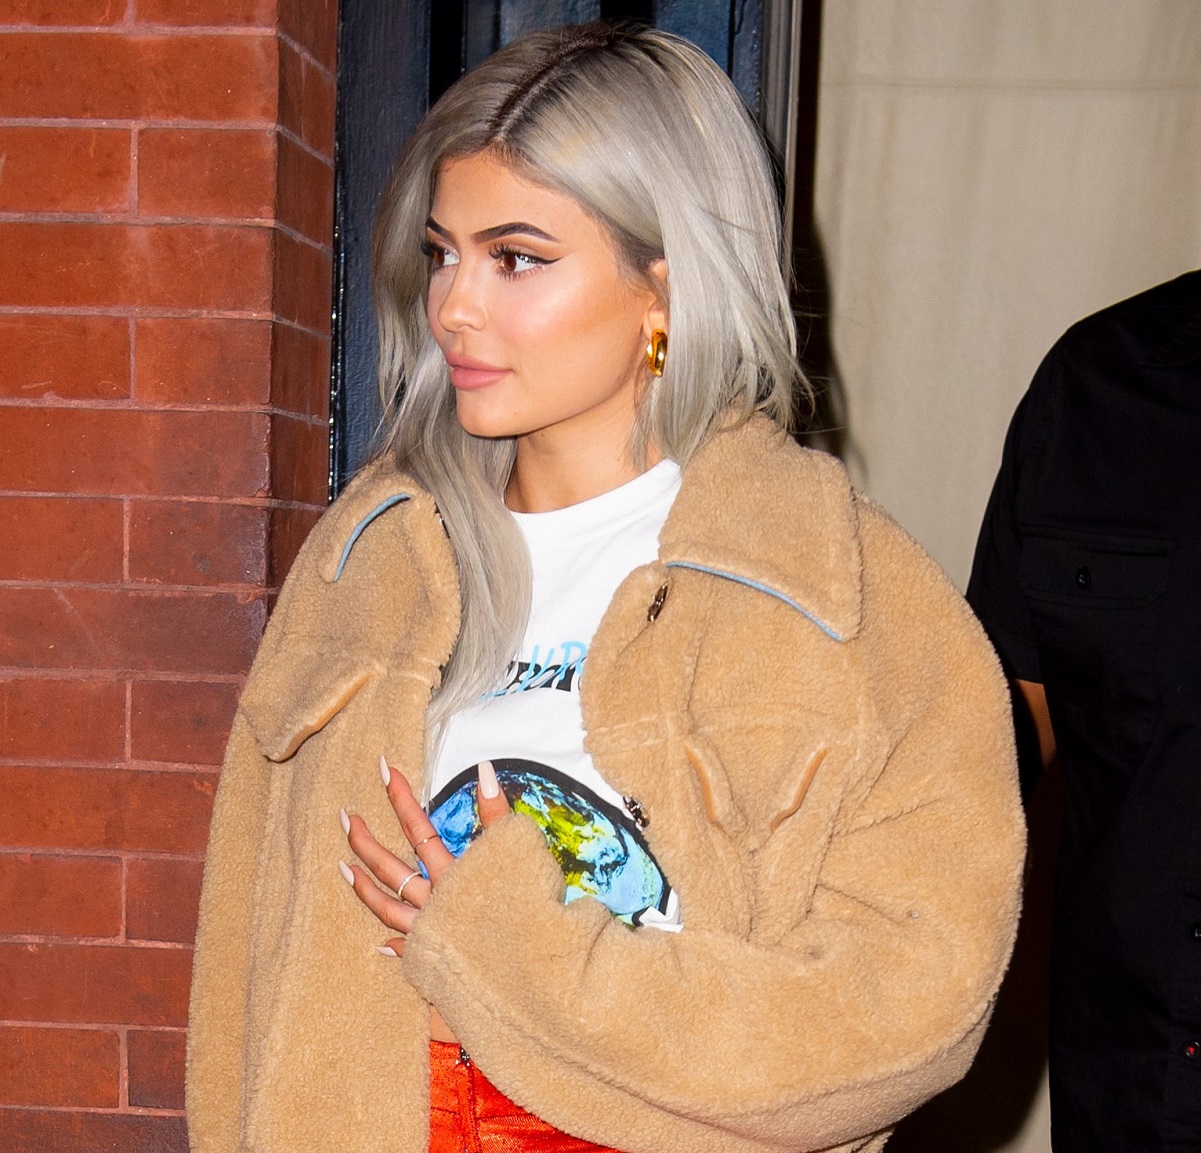 Video Shows What Kylie Jenner Carries Inside Her Purse